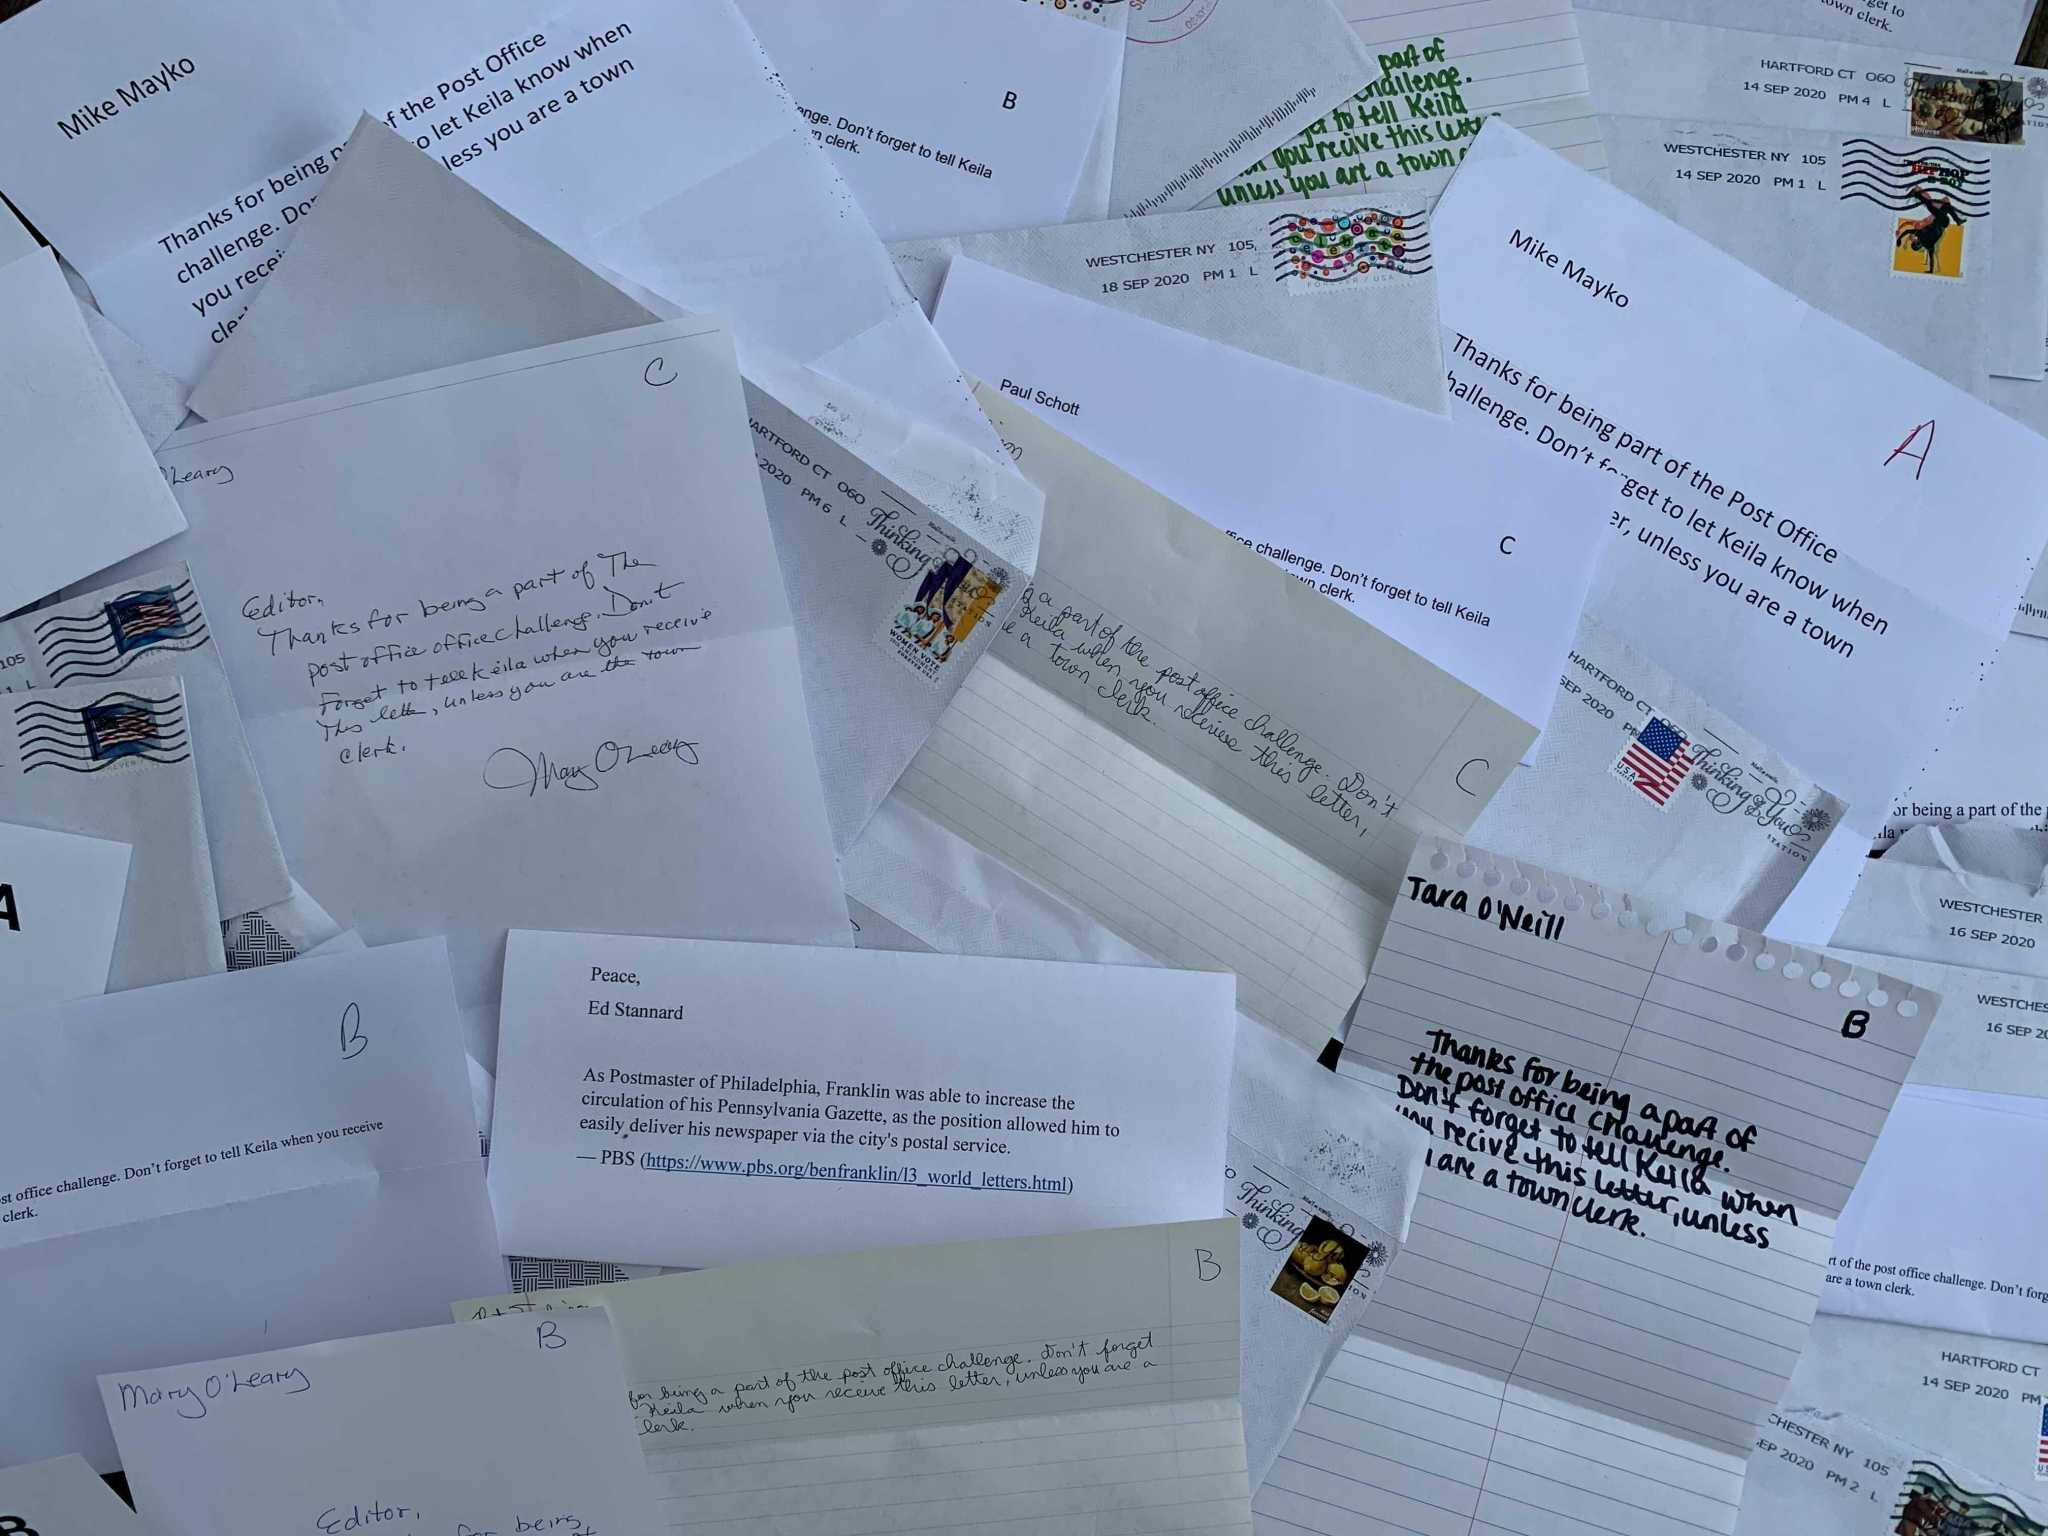 We mailed about 400 letters to test USPS in CT. Most arrived in a few days,  but some never did.